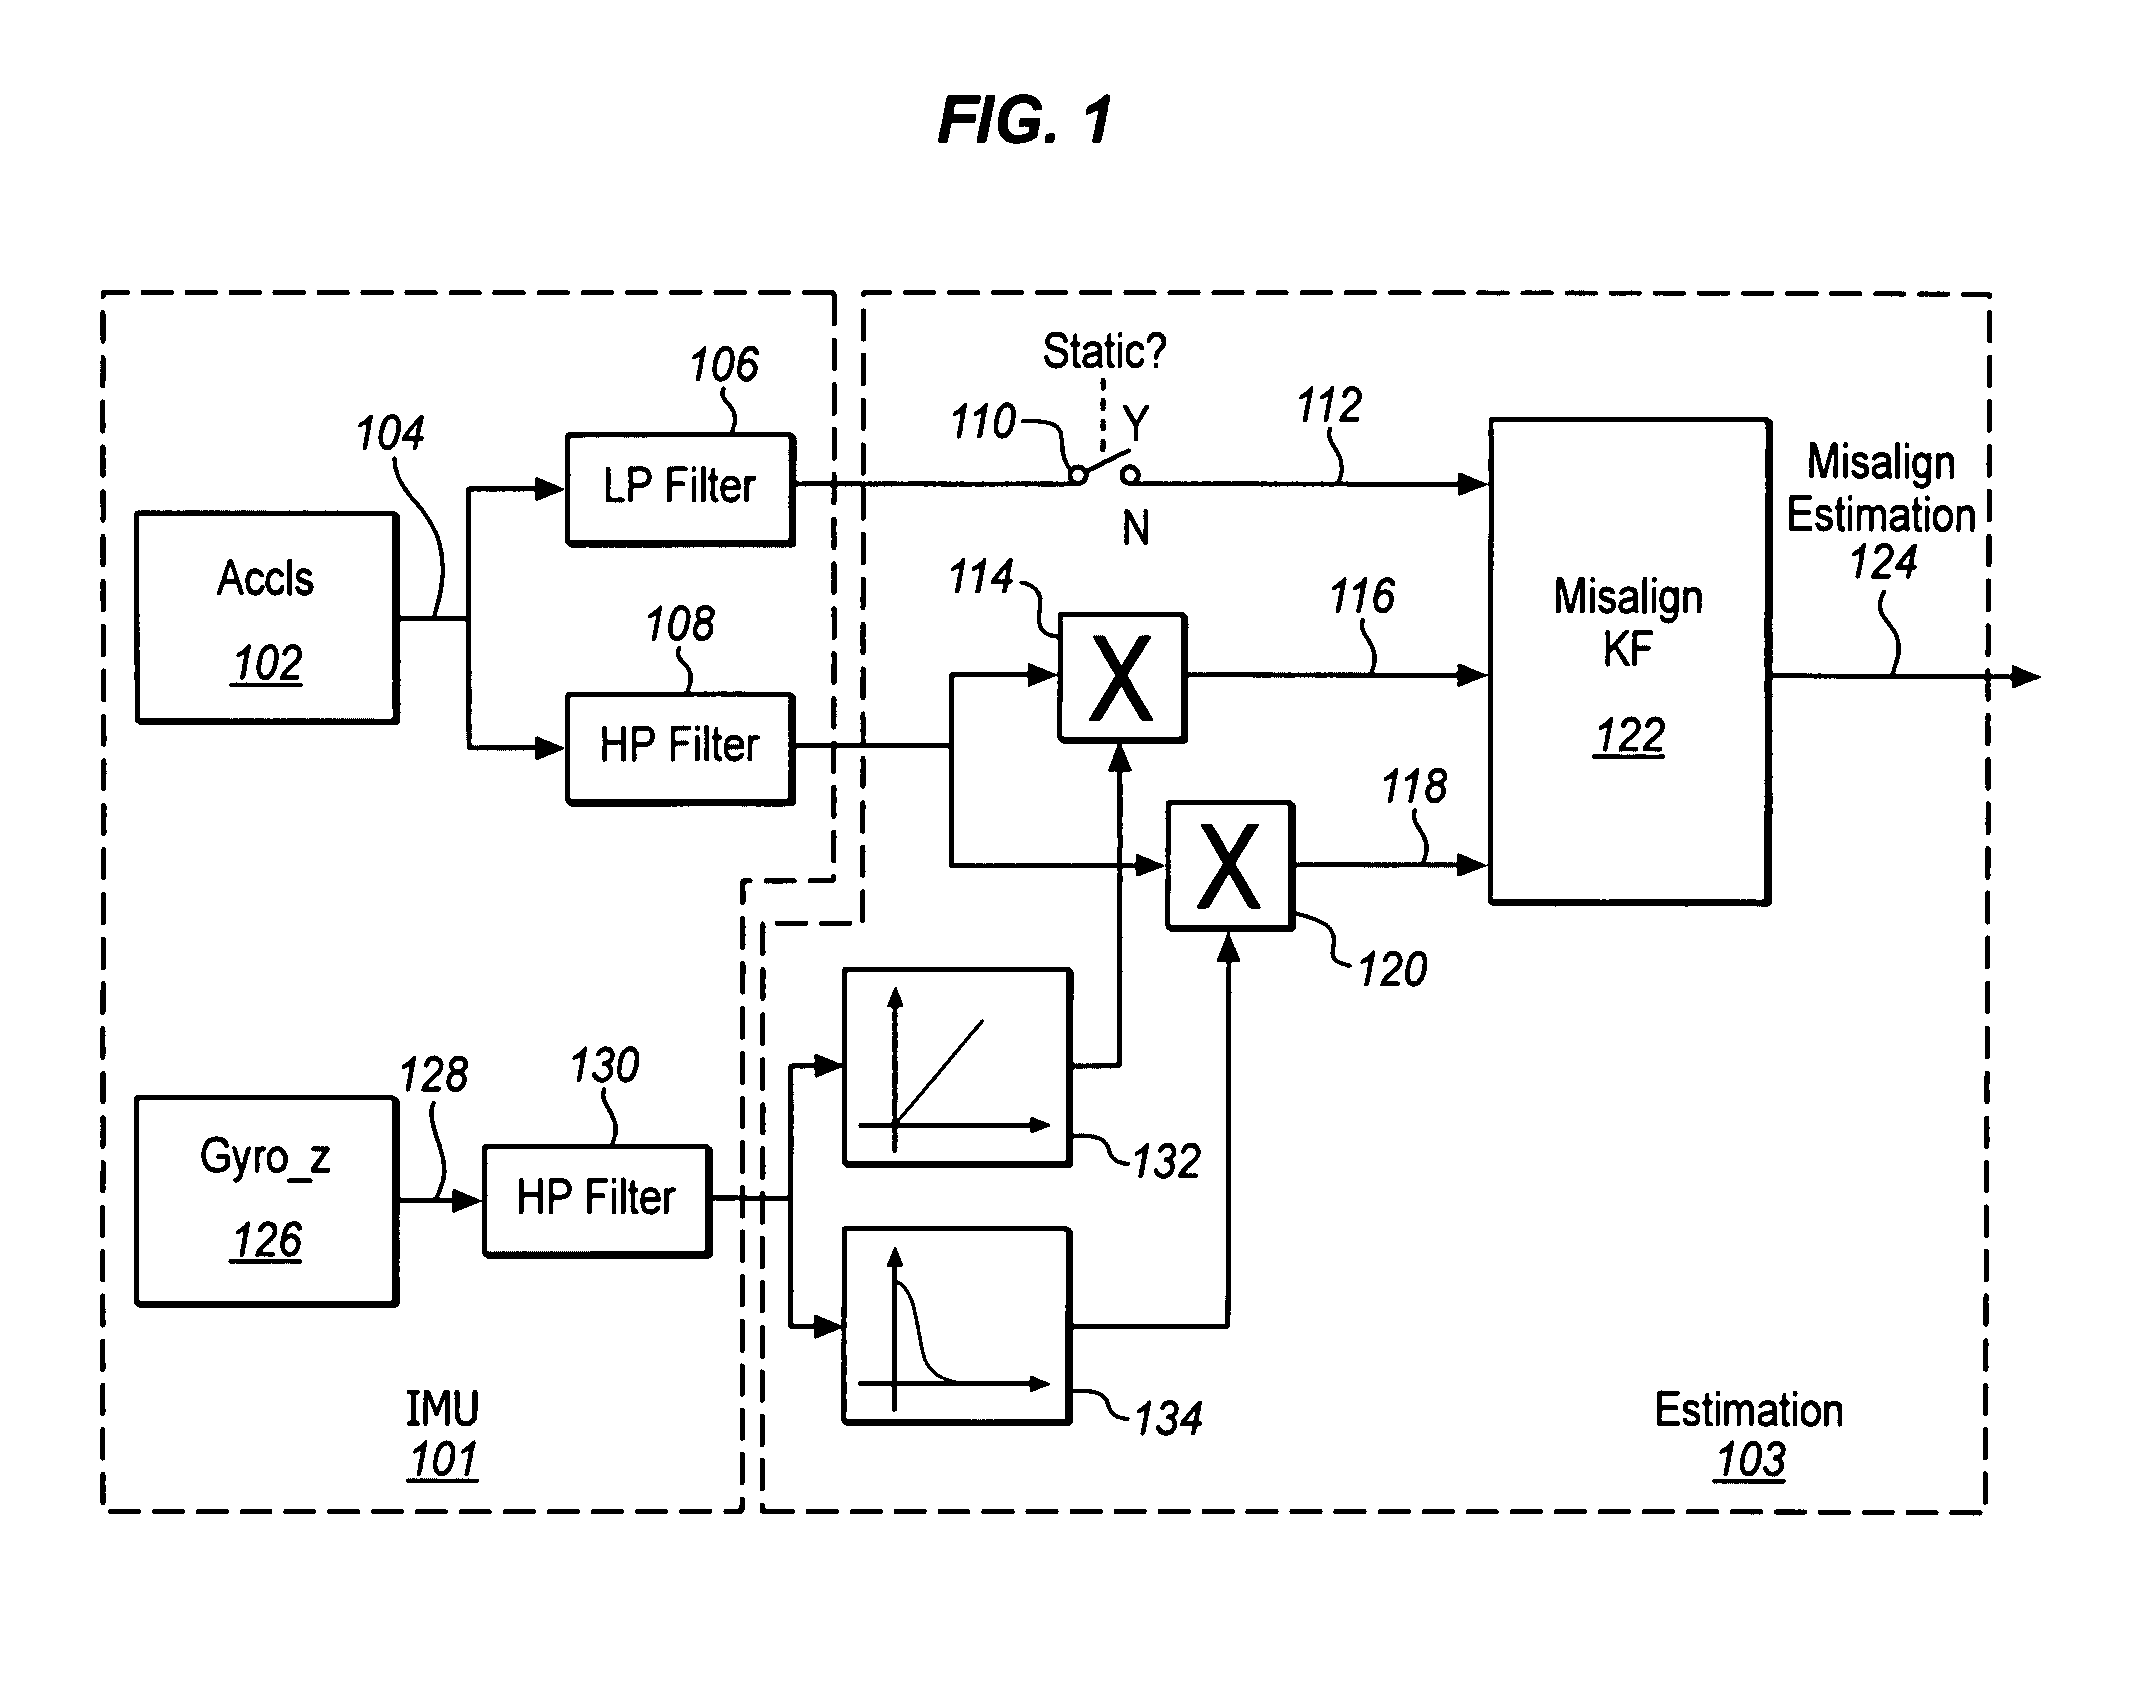 Compensation for mounting misalignment of a navigation device